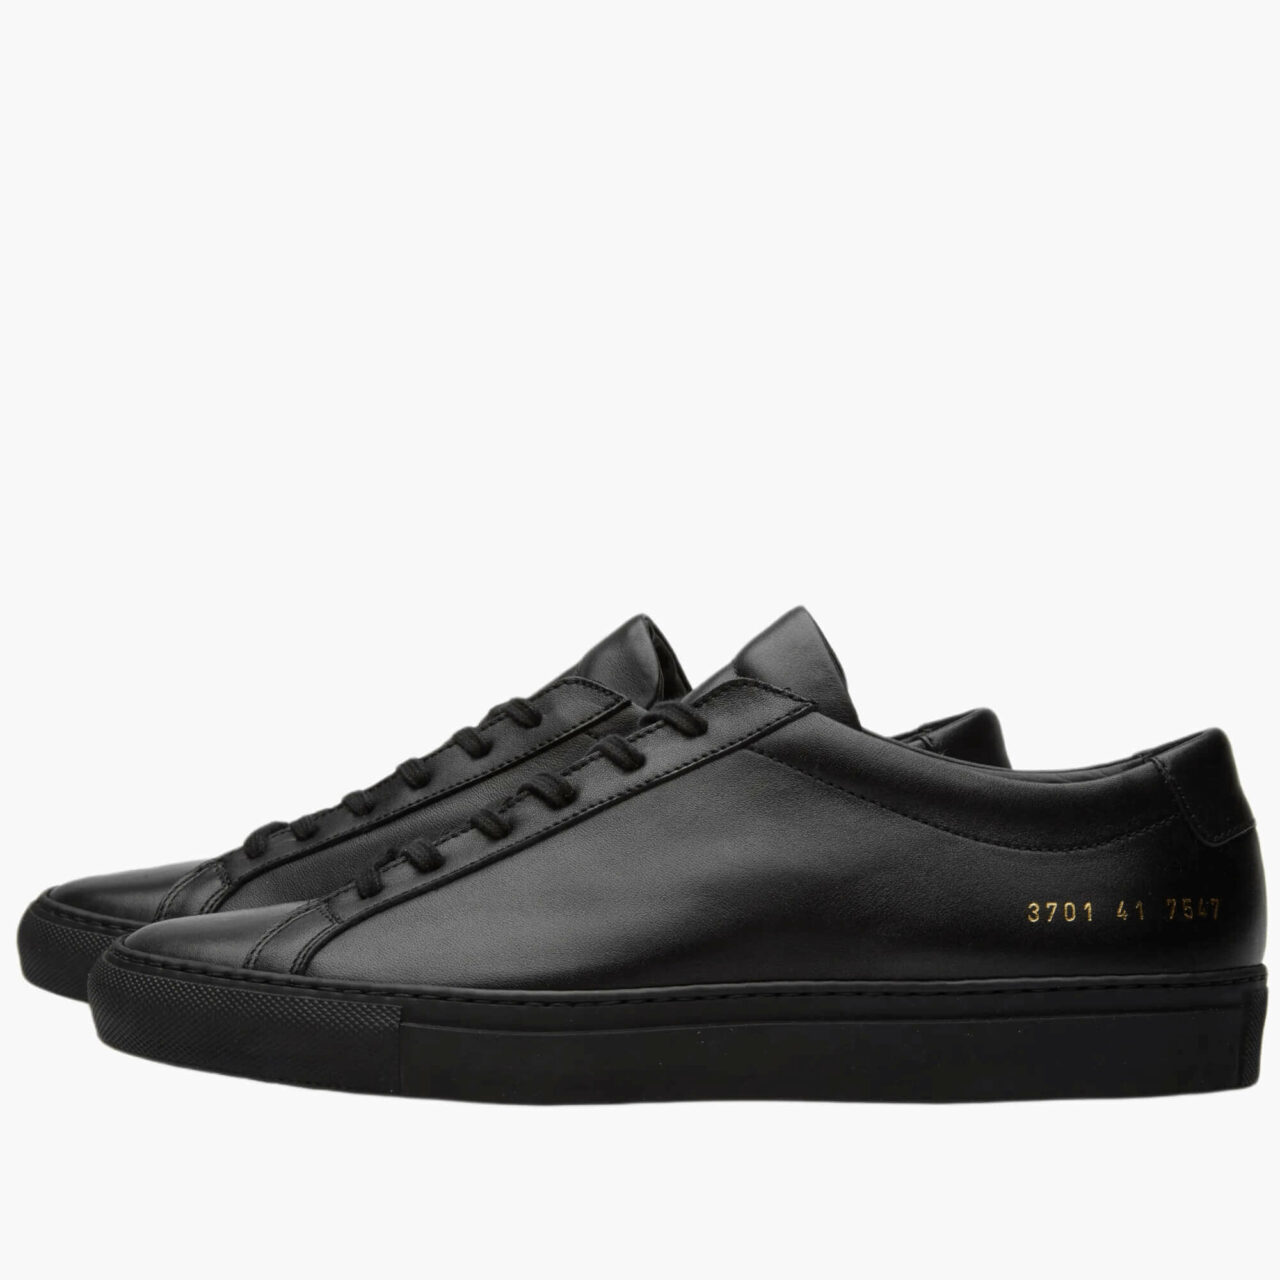 Common Projects Women's Original Achilles Leather Low-Top Sneakers